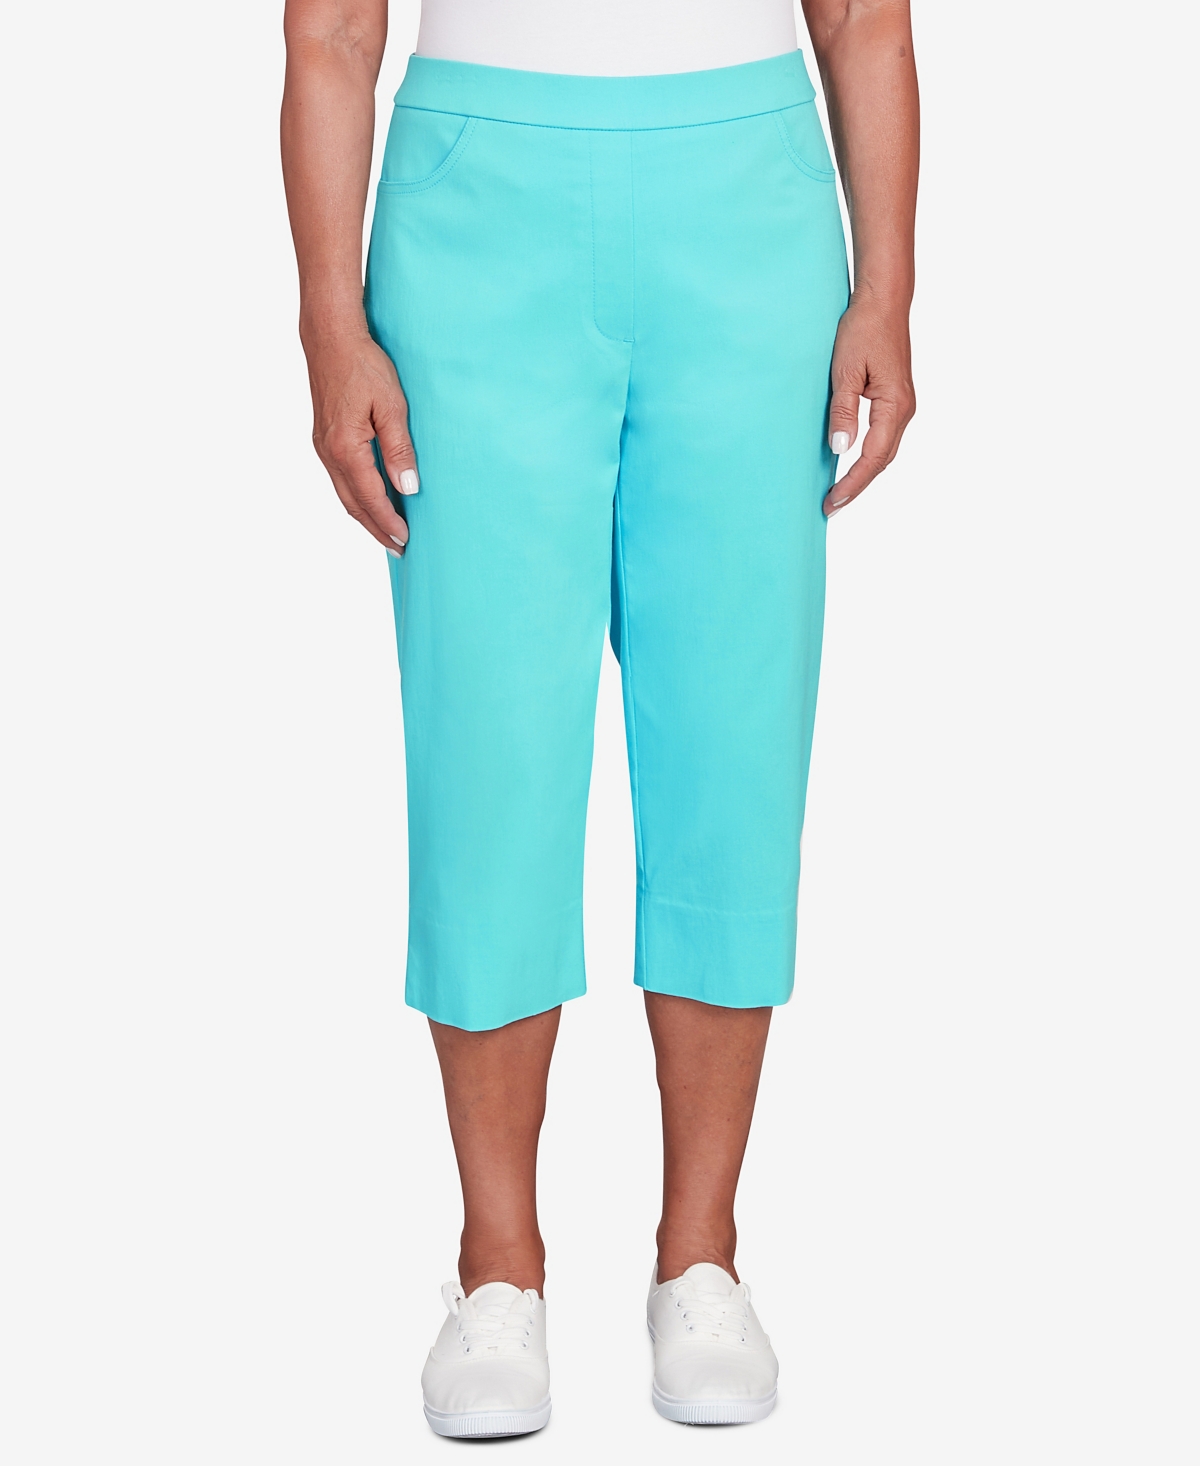 Shop Alfred Dunner Missy Women's Classics Allure Clam Digger Capri Pants In Turquoise